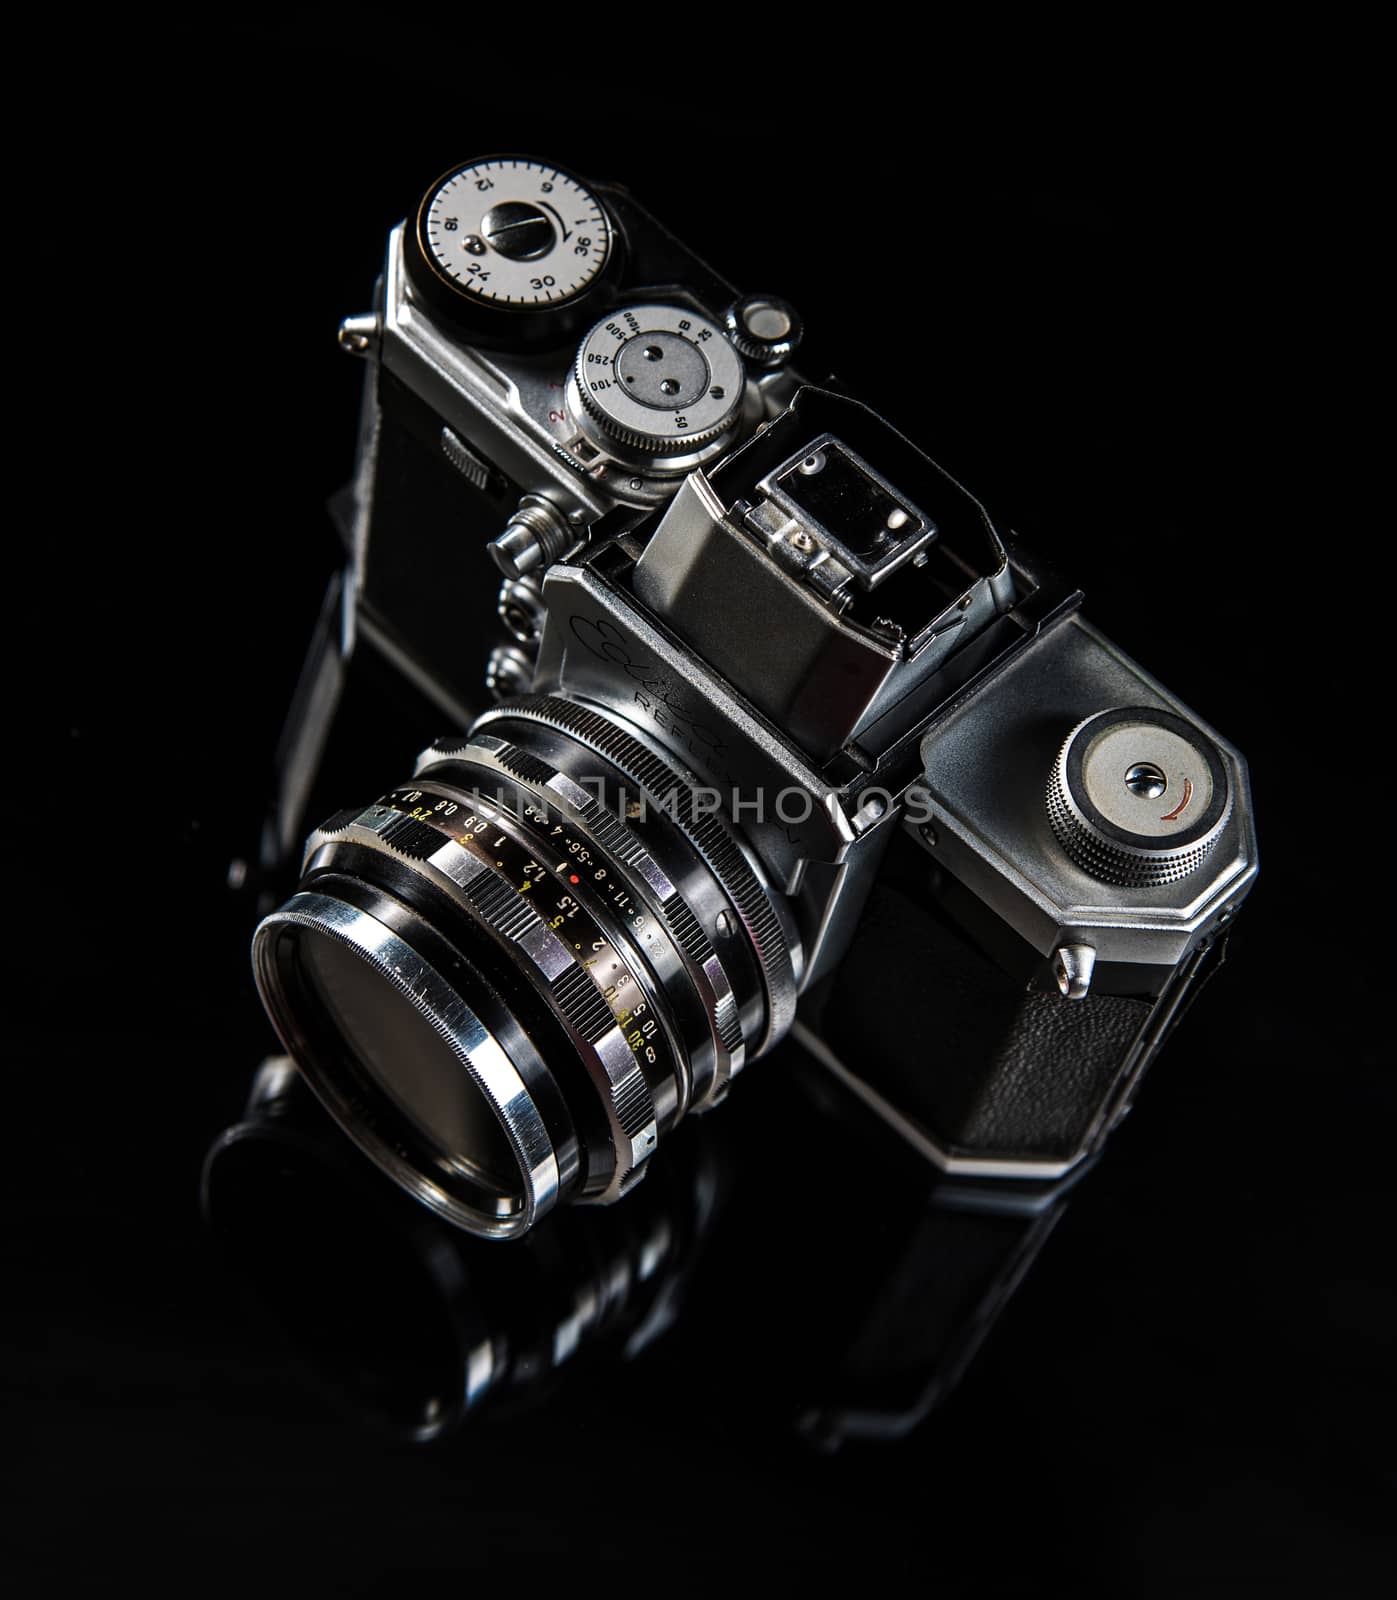 Black and silver Photo Camera standing on a glass pane